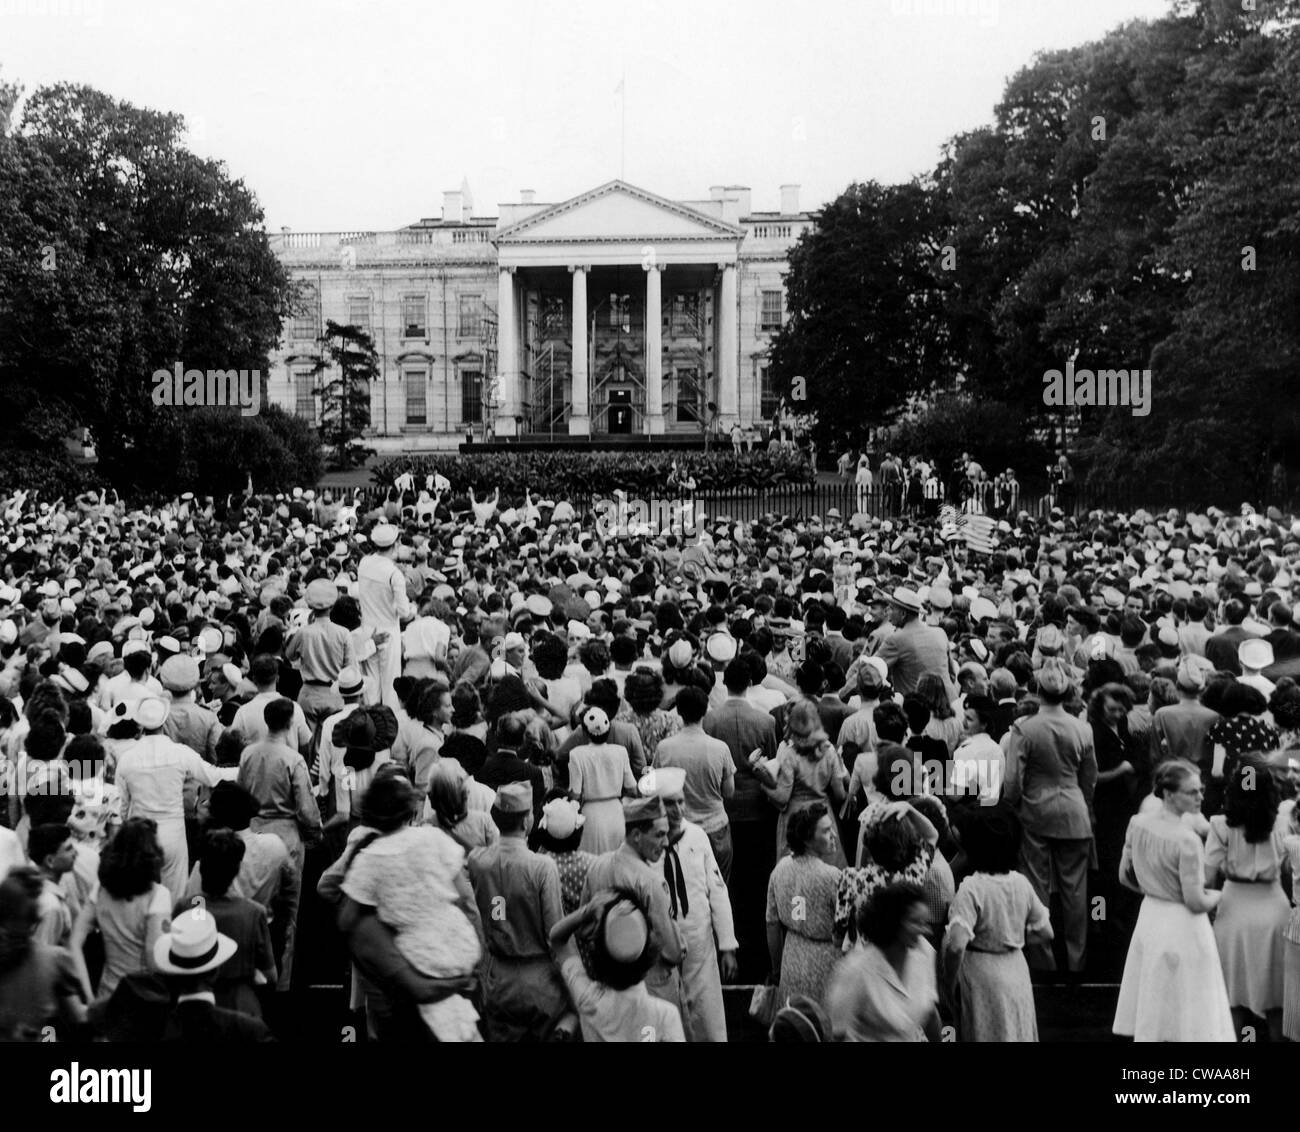 Crowds gathered around the White House after hearing that about Japan's surrender in World War II, Washington D.C., 1945.. Stock Photo